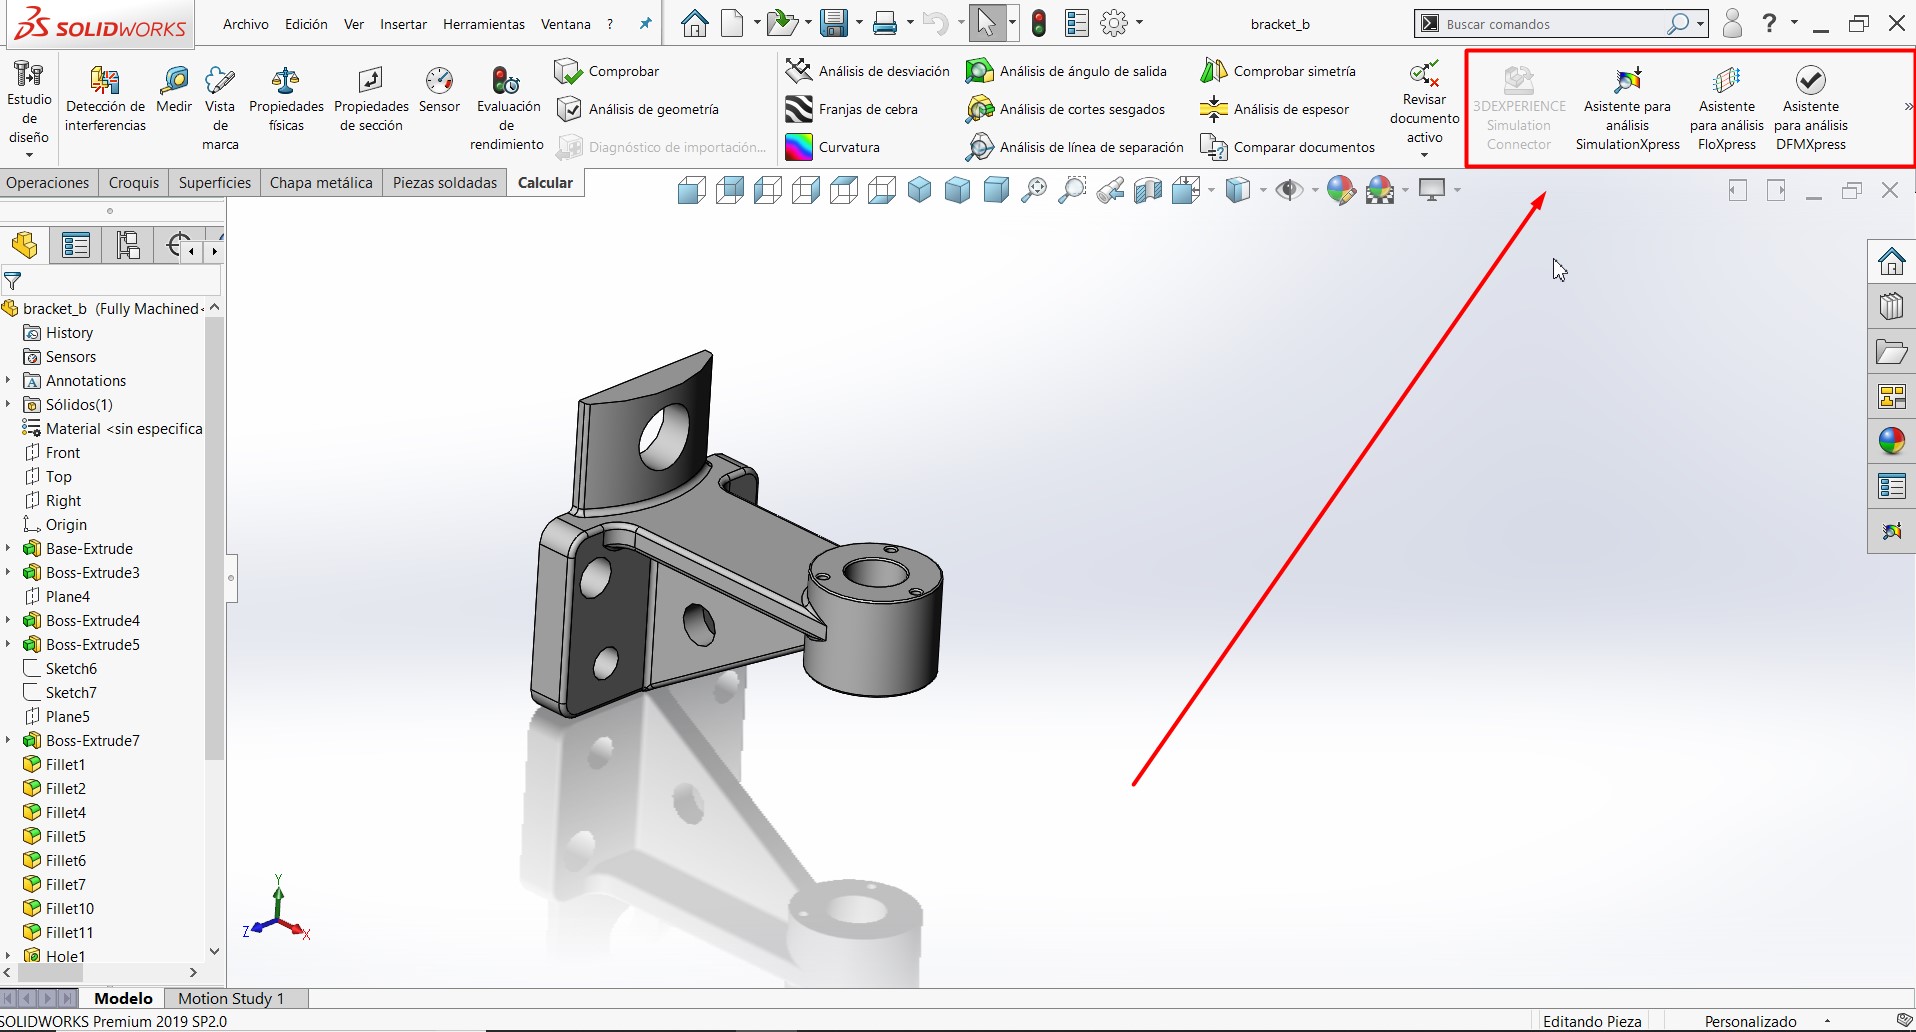 Productos SOLIDWORKS Xpress - Blog - Intelligy